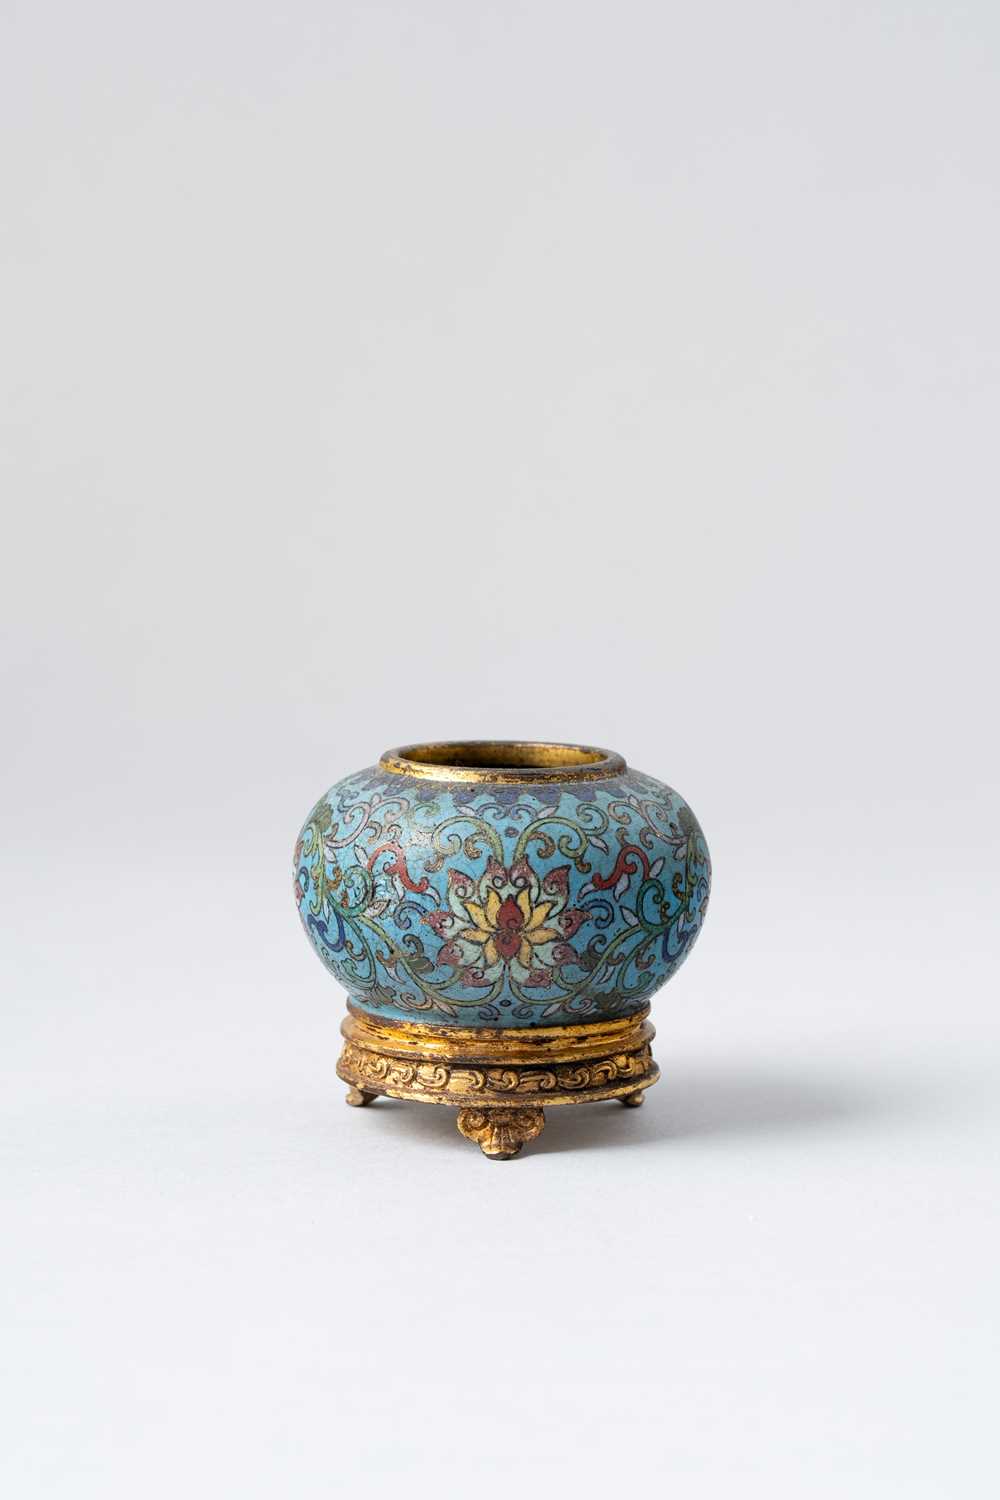 NO RESERVE A CHINESE CLOISONNE ENAMEL WATERPOT QING DYNASTY OR LATER The globular body decorated